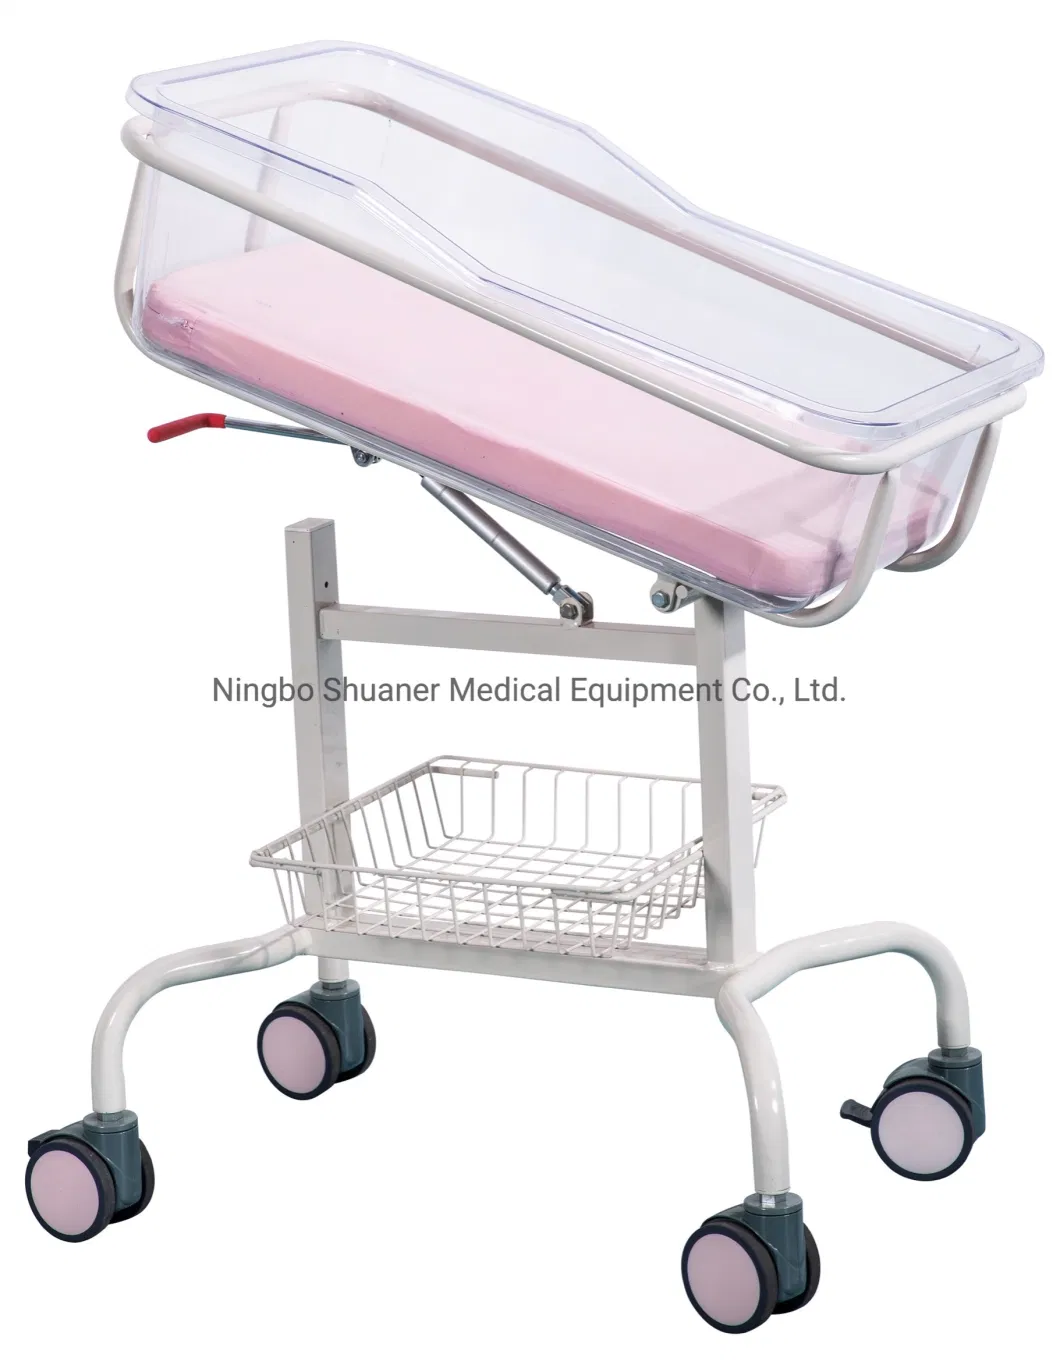 Medical Equipment Baby Hospital Crib Bed Hospital Child Infant Baby Cribs Cot Bed